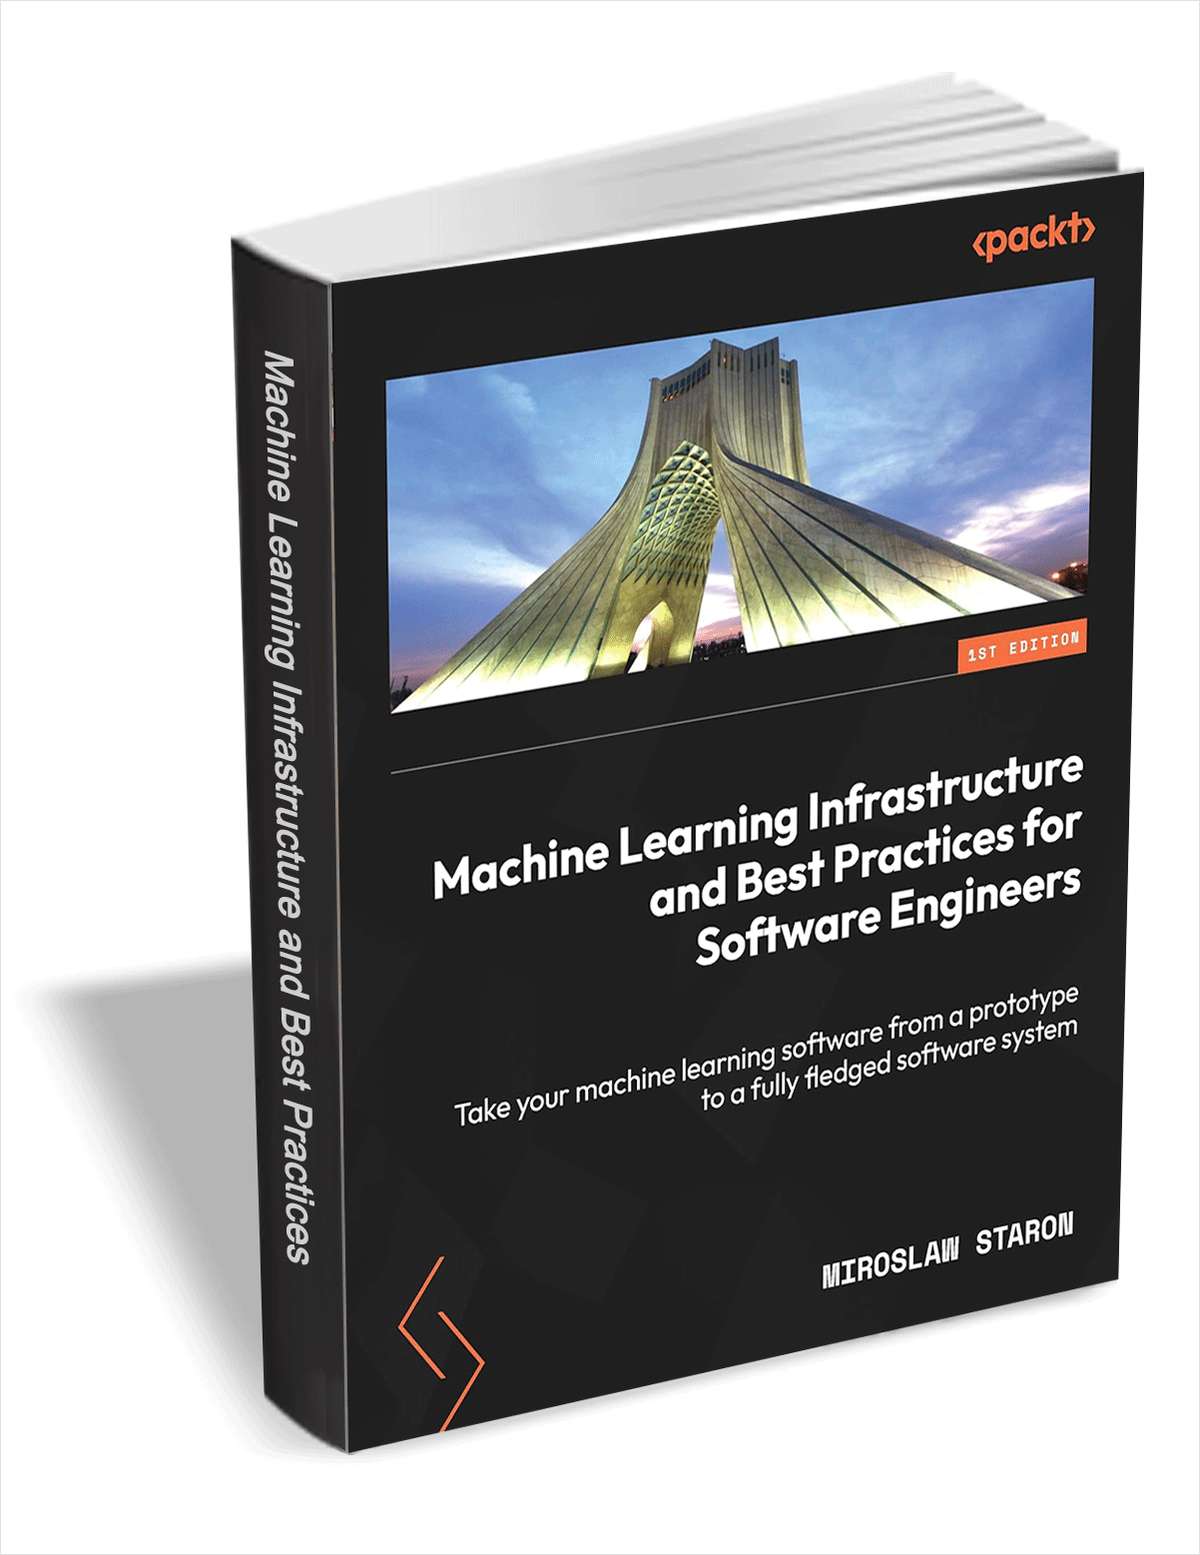 Machine Learning Infrastructure and Best Practices for Software Engineers ($35.99 Value) FREE for a Limited Time